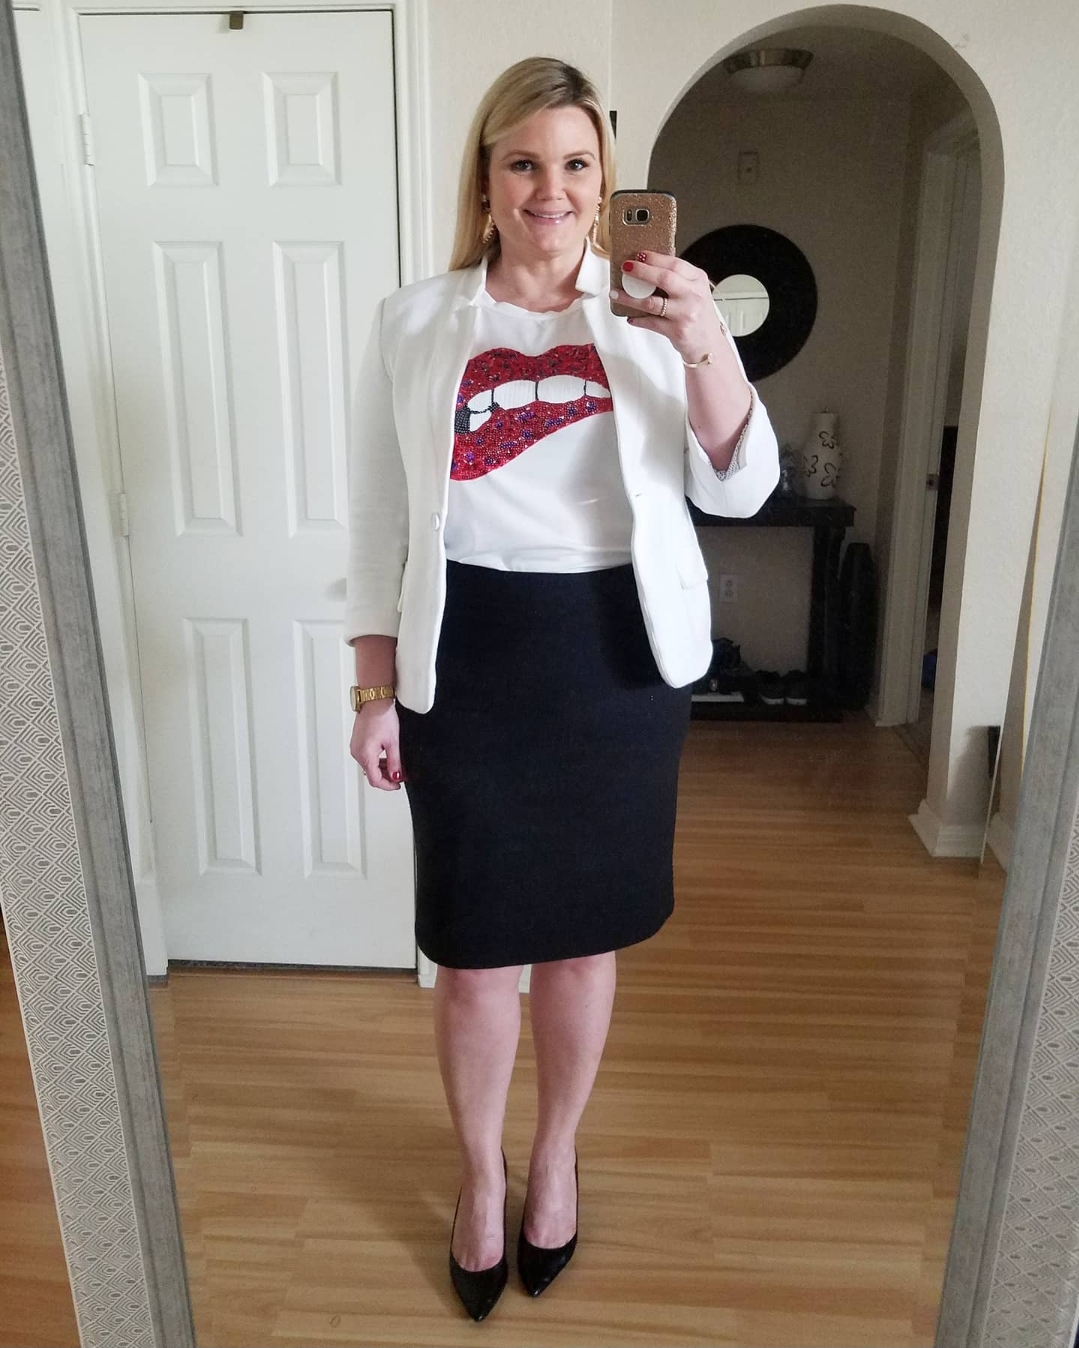 Orlando Fashion Blogger Emily of Fabulously Overdressed shares 5 ways to style a graphic tee Emily of Fabulously Overdressed shows how to wear a graphic tee to work: lips tee with white blazer and black pencil skirt.